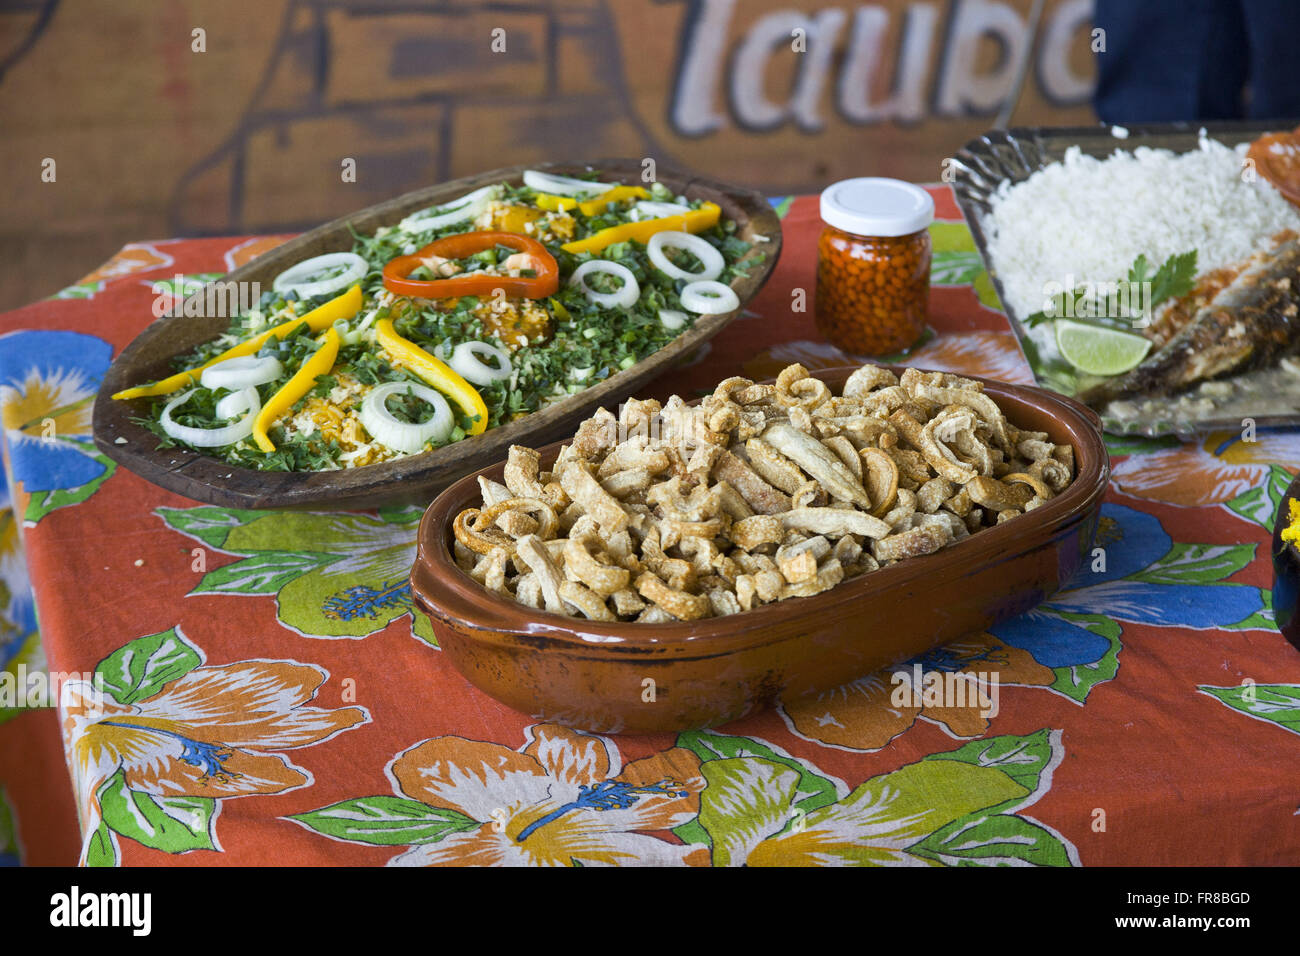 Crackling - cabbage - rice and glass pot with pepper - typical dishes of the interior of Sao Paulo Stock Photo